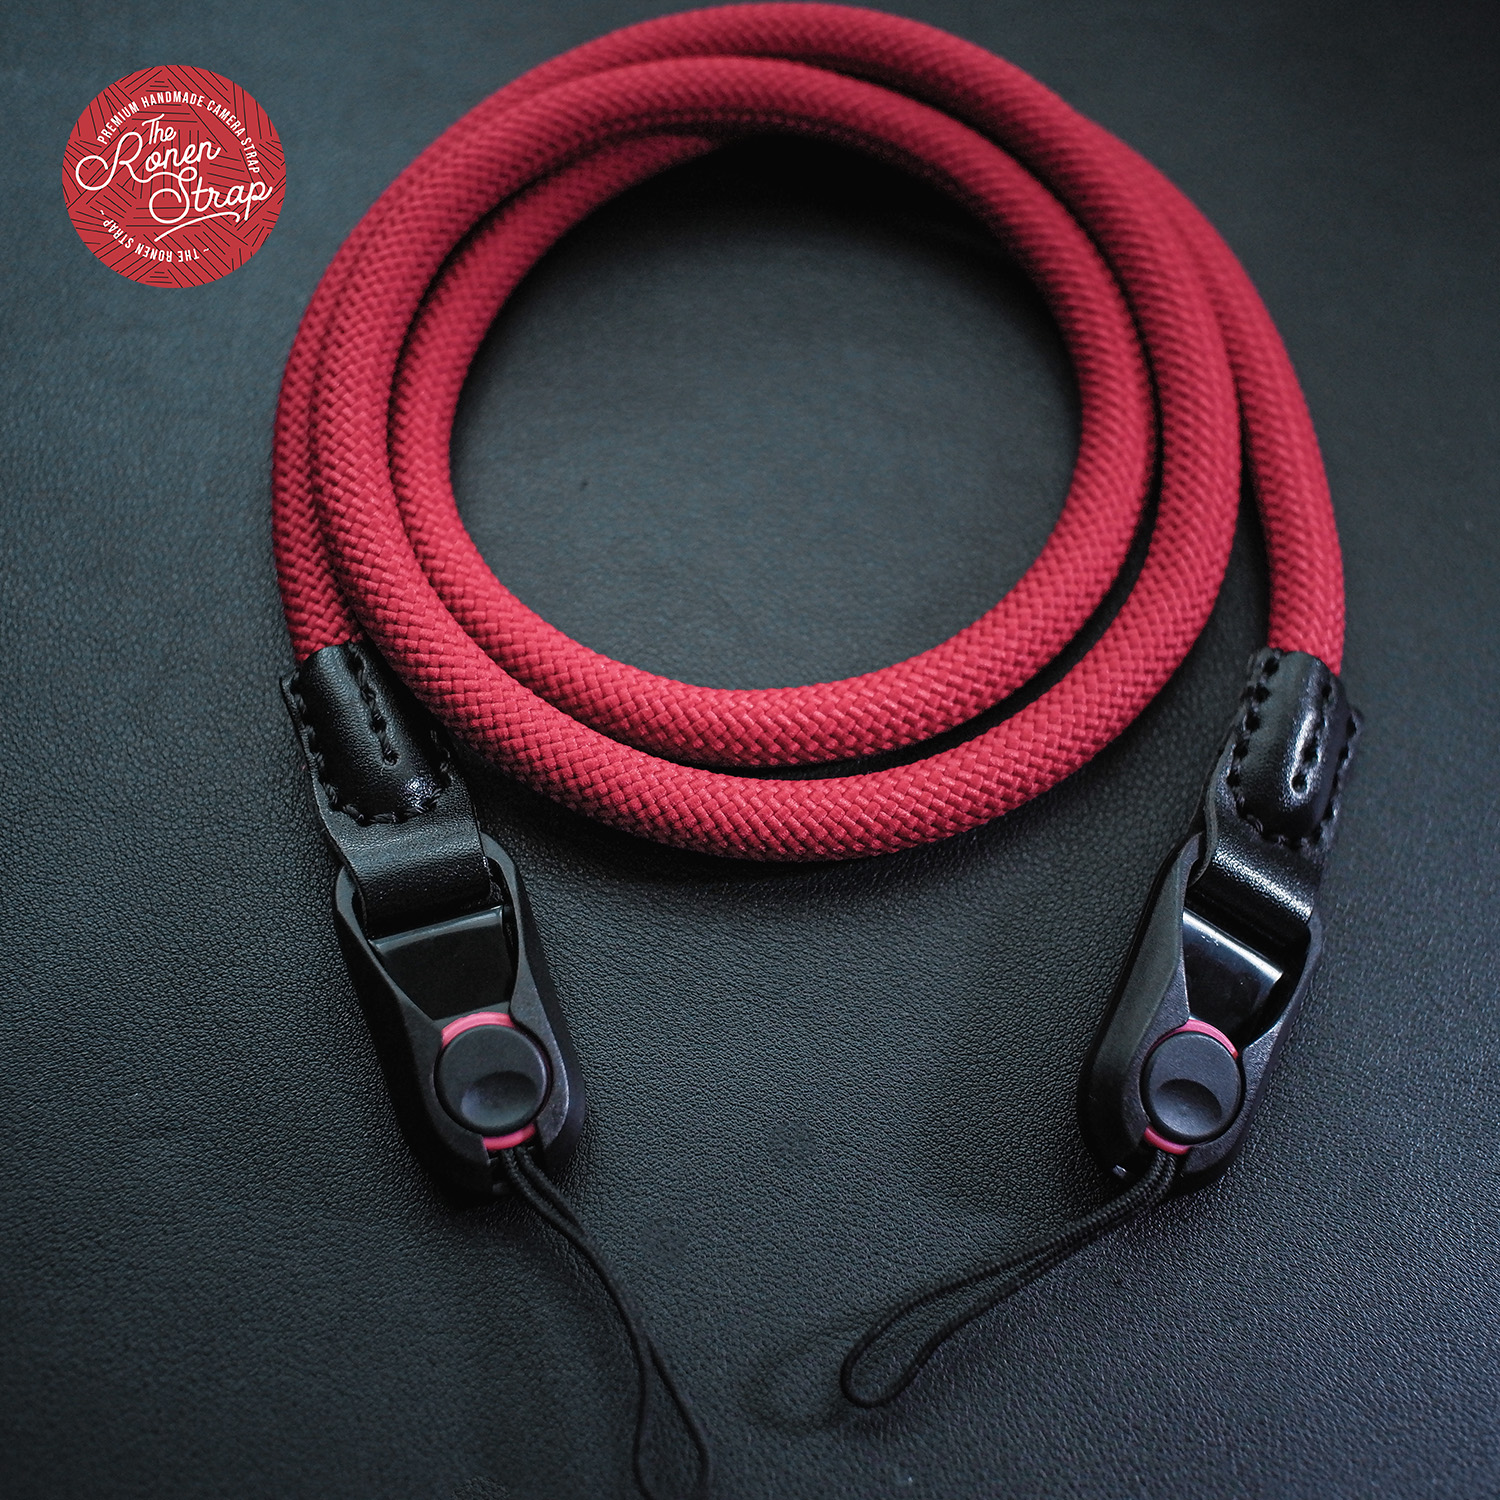 The ronen strap - red nylon rope with quick release